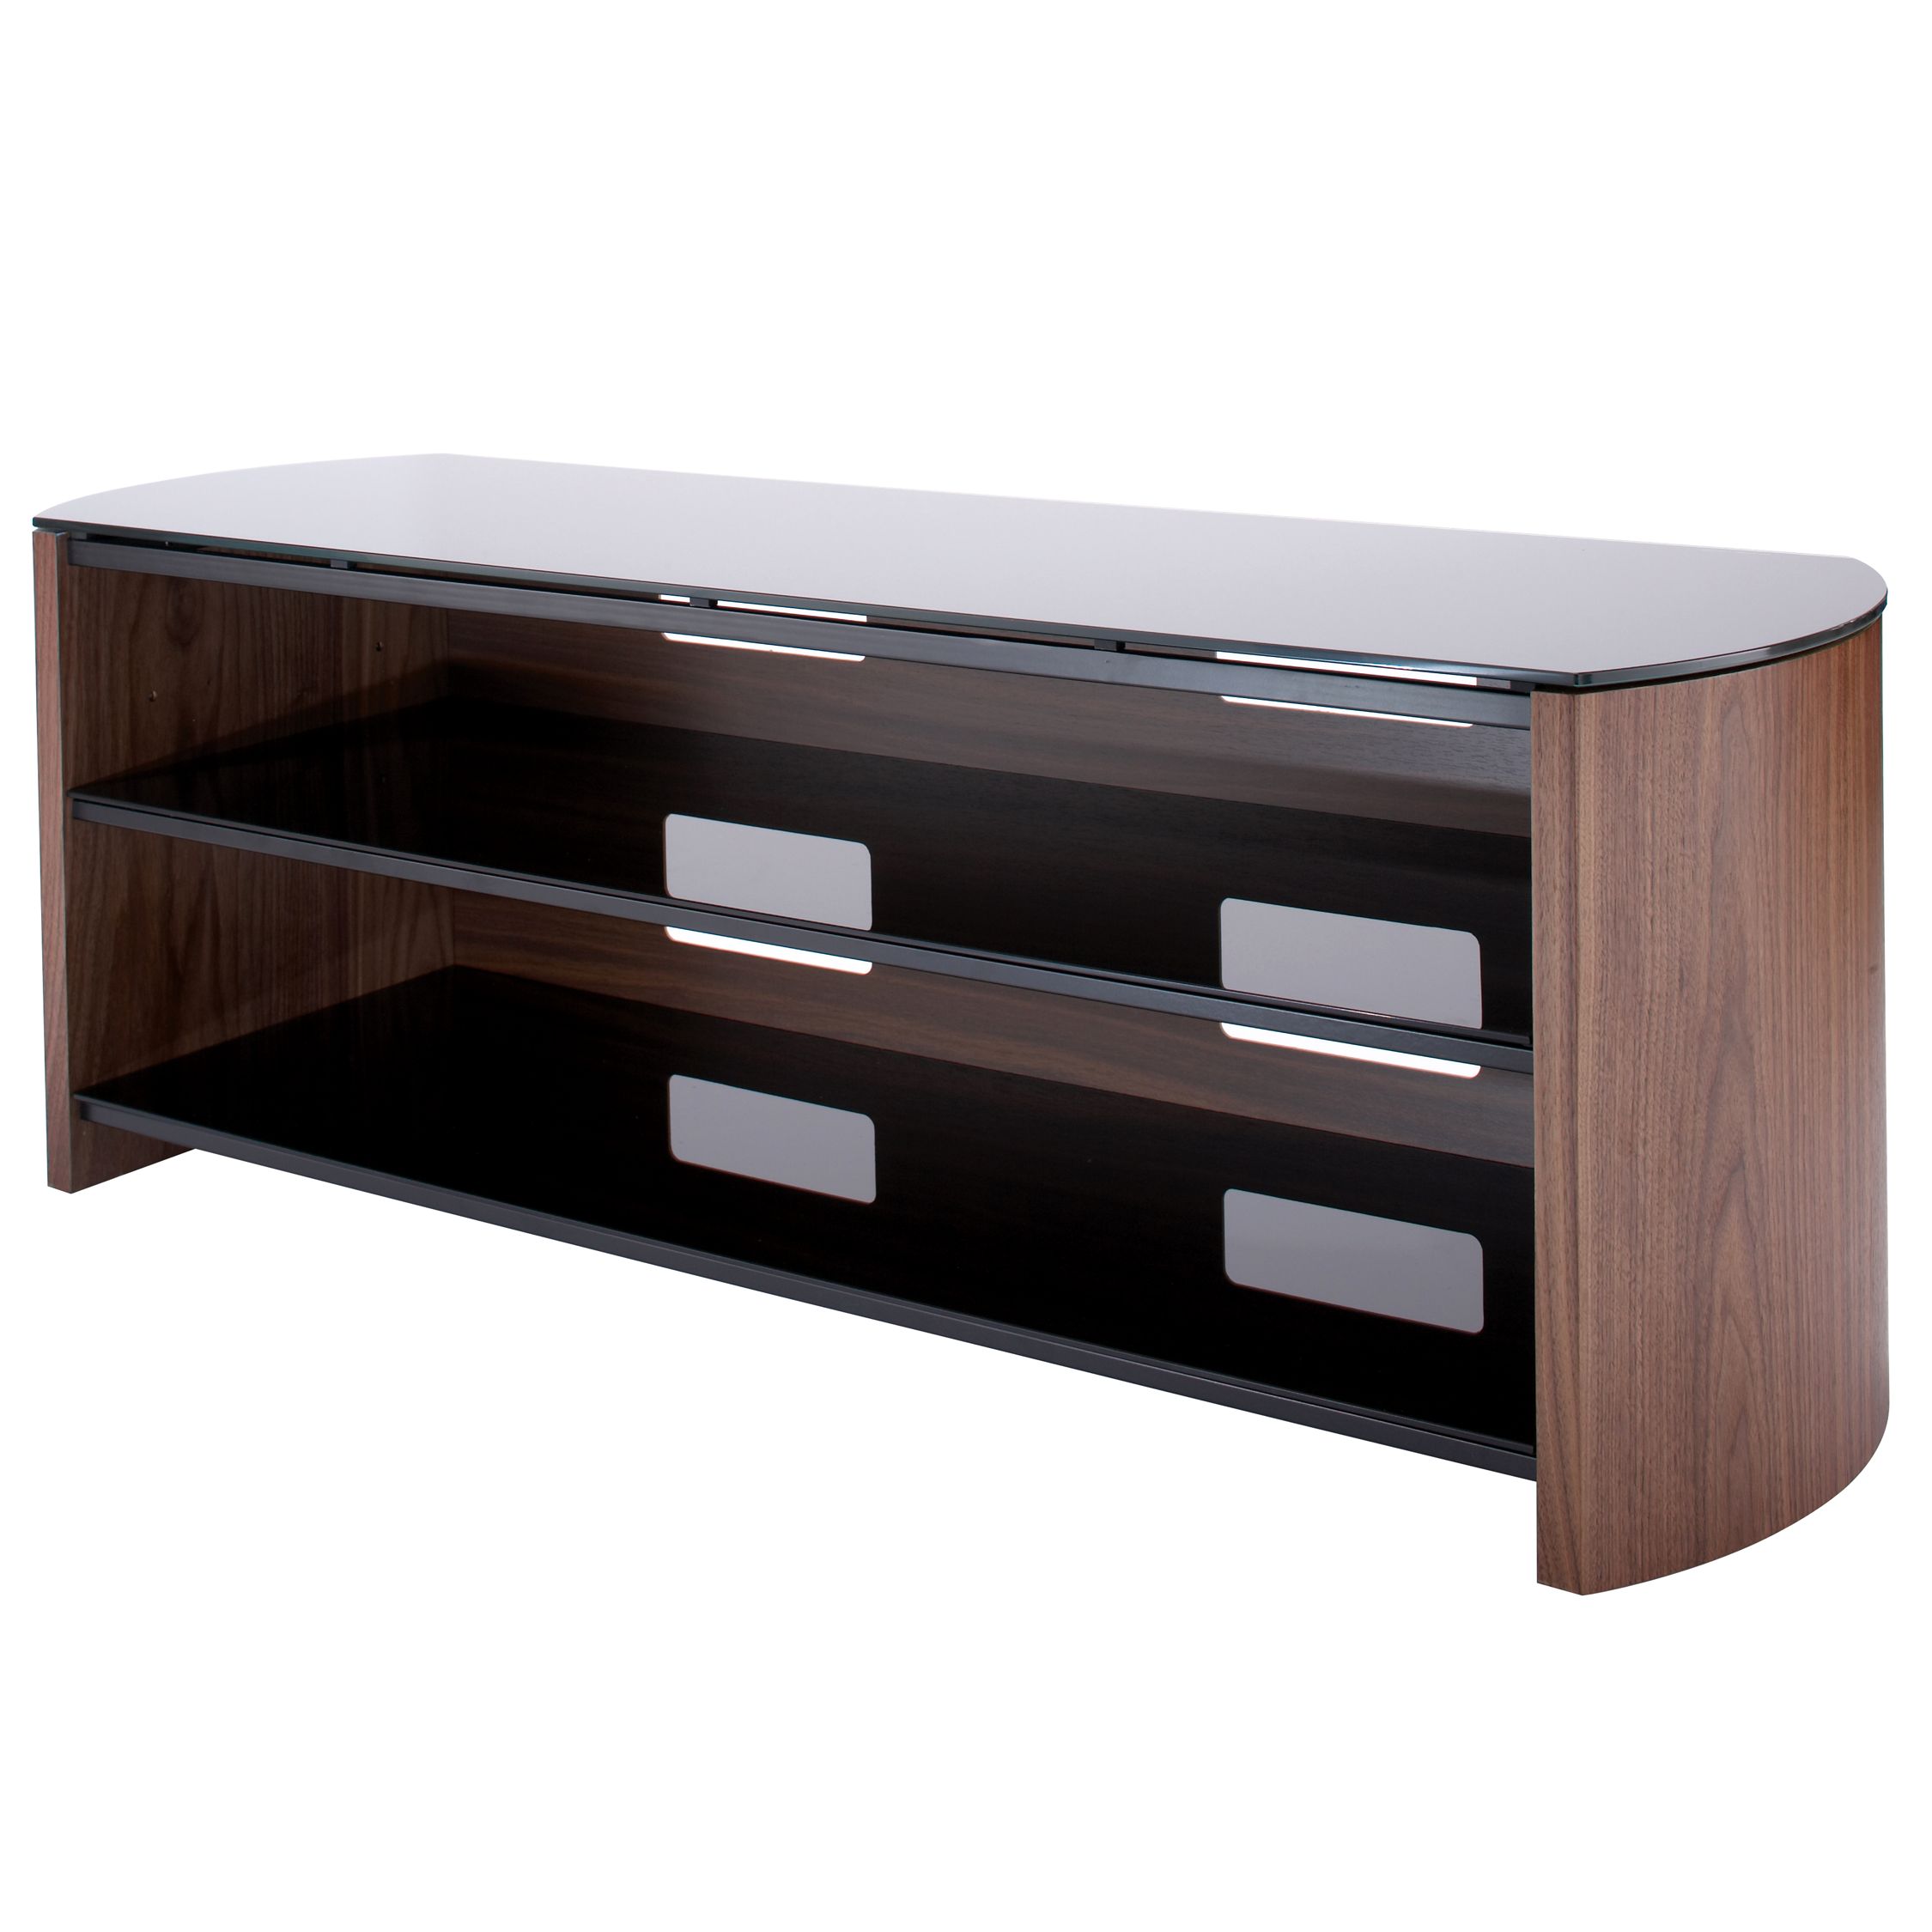 Alphason Finewoods FW1100-W/B Television Stand,